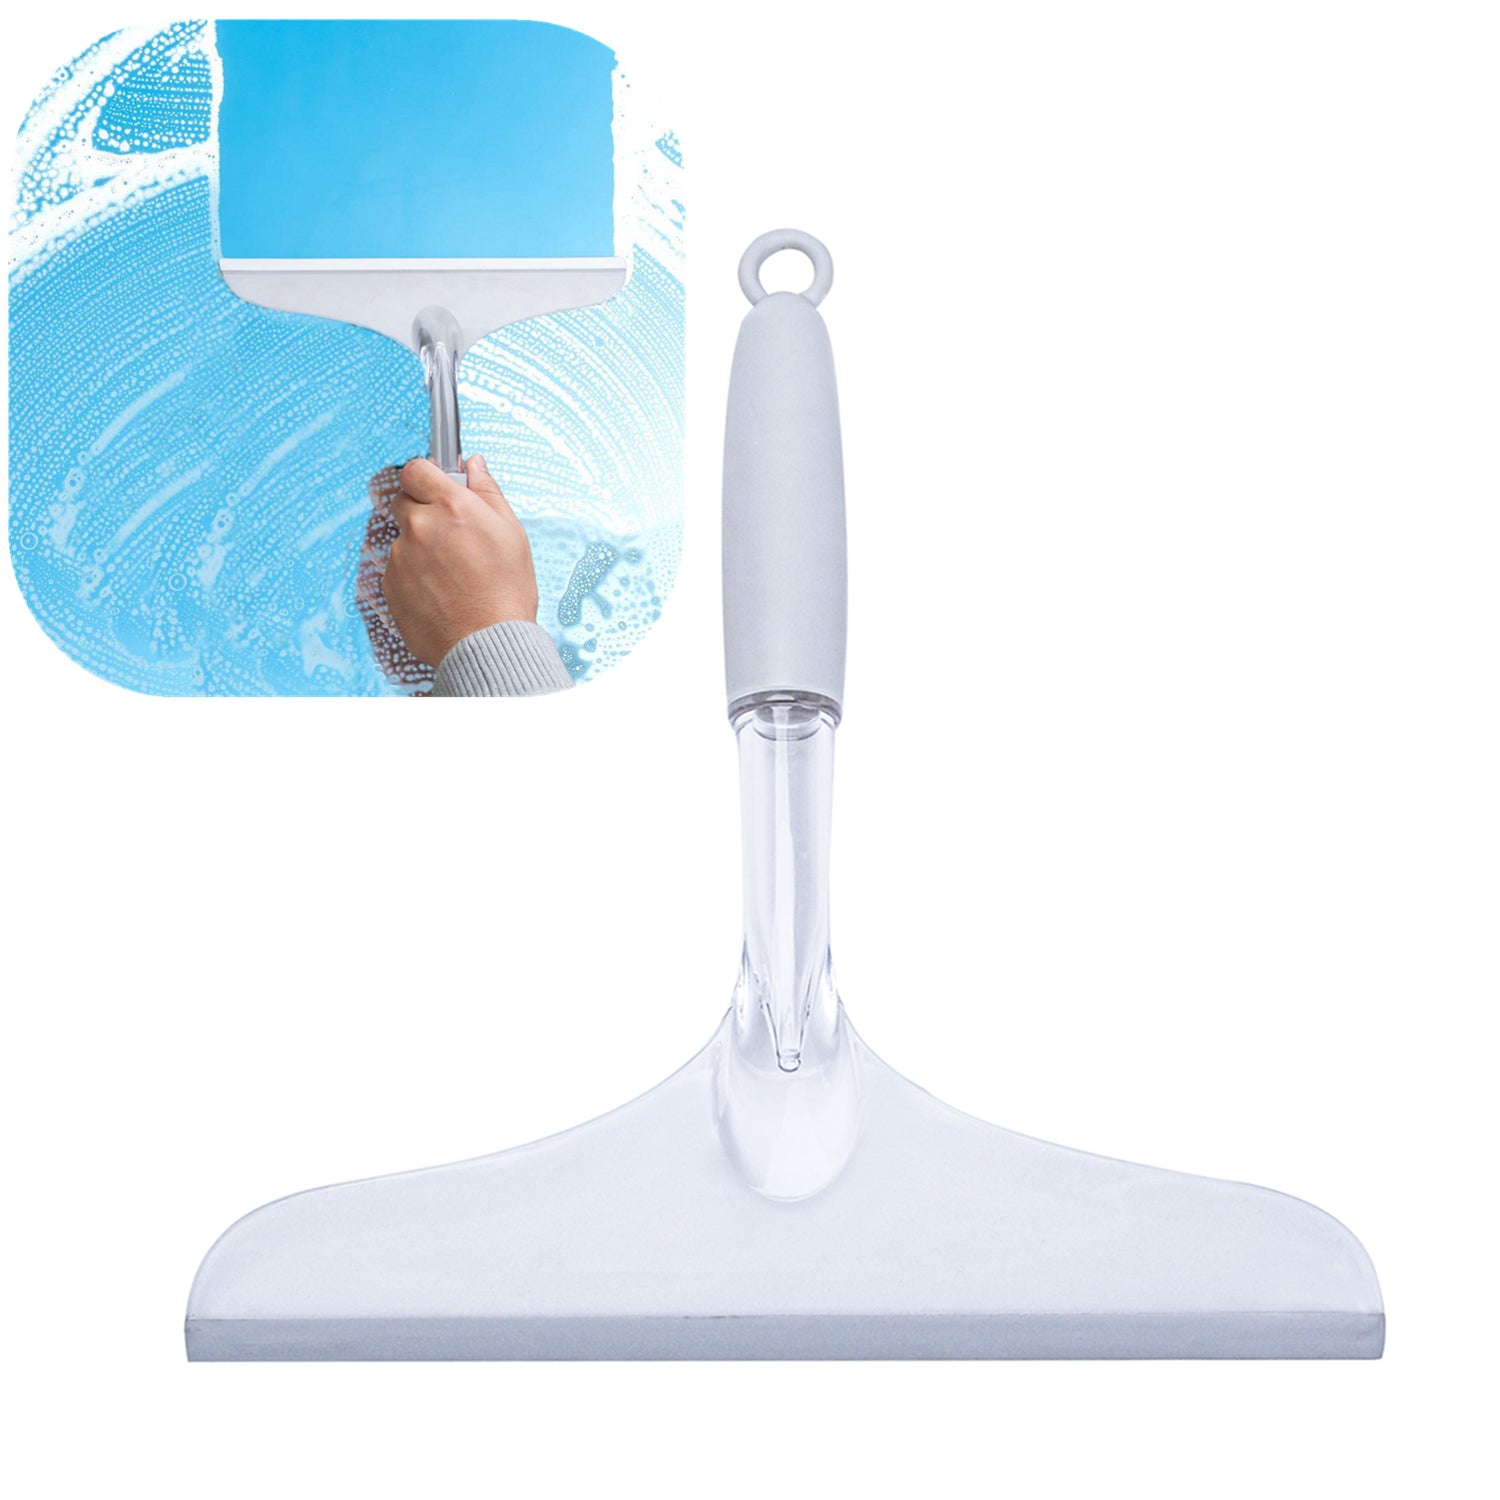 Shower Squeegee for Shower Glass Door, Shower Wall, Silicone Rubber Blade Bathroom Squeegee, Tile Wall Window Mirror Car Windshield Squeegee with Hang